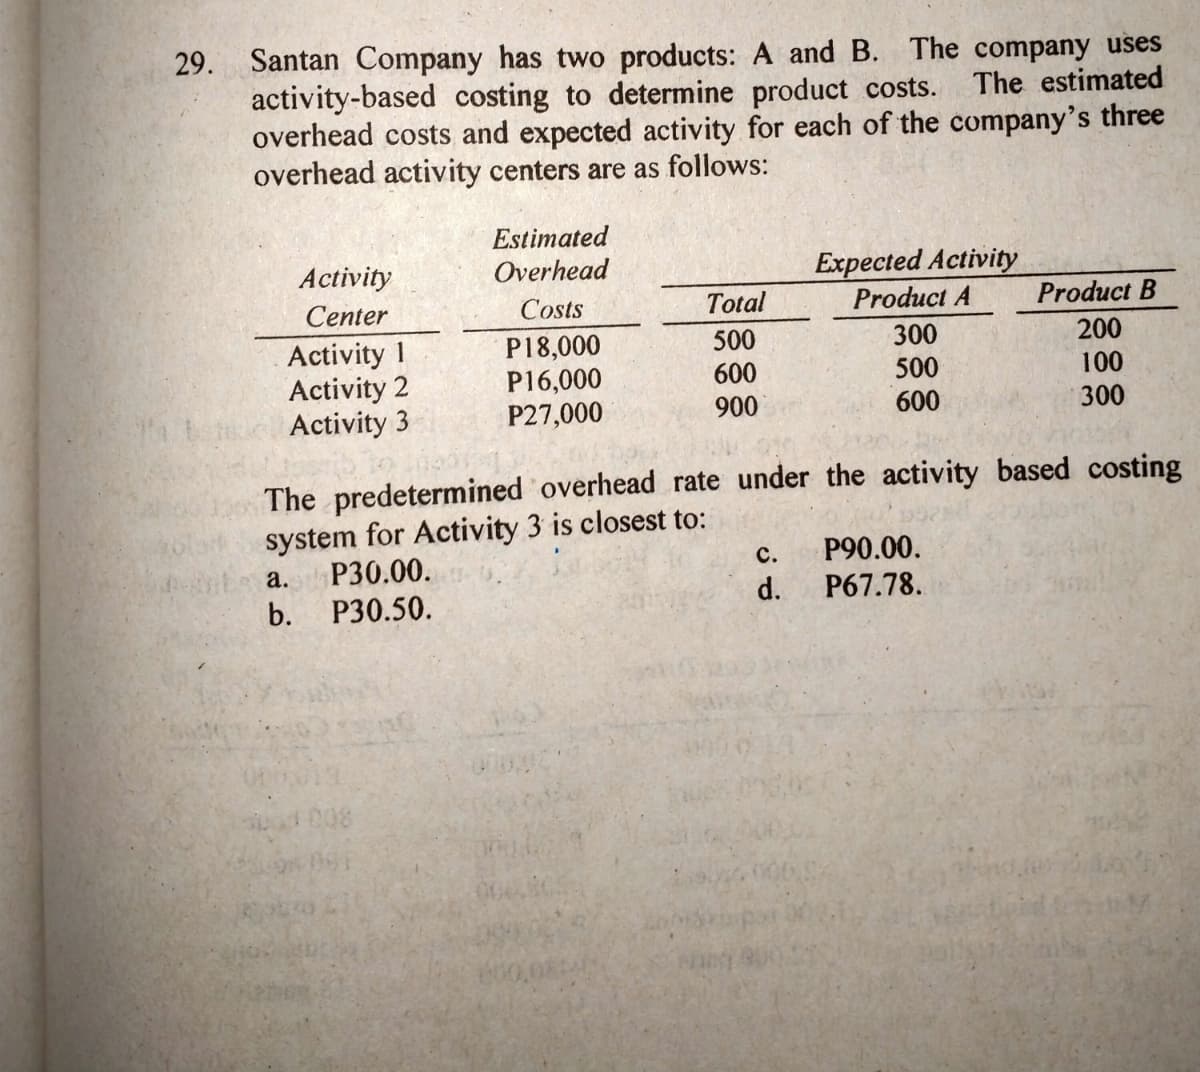 29. Santan Company has two products: A and B. The company uses
The estimated
activity-based costing to determine product costs.
overhead costs and expected activity for each of the company's three
overhead activity centers are as follows:
Estimated
Activity
Overhead
Expected Activity
Product A
Center
Costs
Total
Product B
P18,000
Activity 1
500
300
200
P16,000
500
600
Activity 2
100
900
P27,000
600
300
tende Activity 3
The predetermined overhead rate under the activity based costing
system for Activity 3 is closest to:
C.
P90.00.
a. P30.00.
d.
P67.78.
b.
P30.50.
600,02
hou